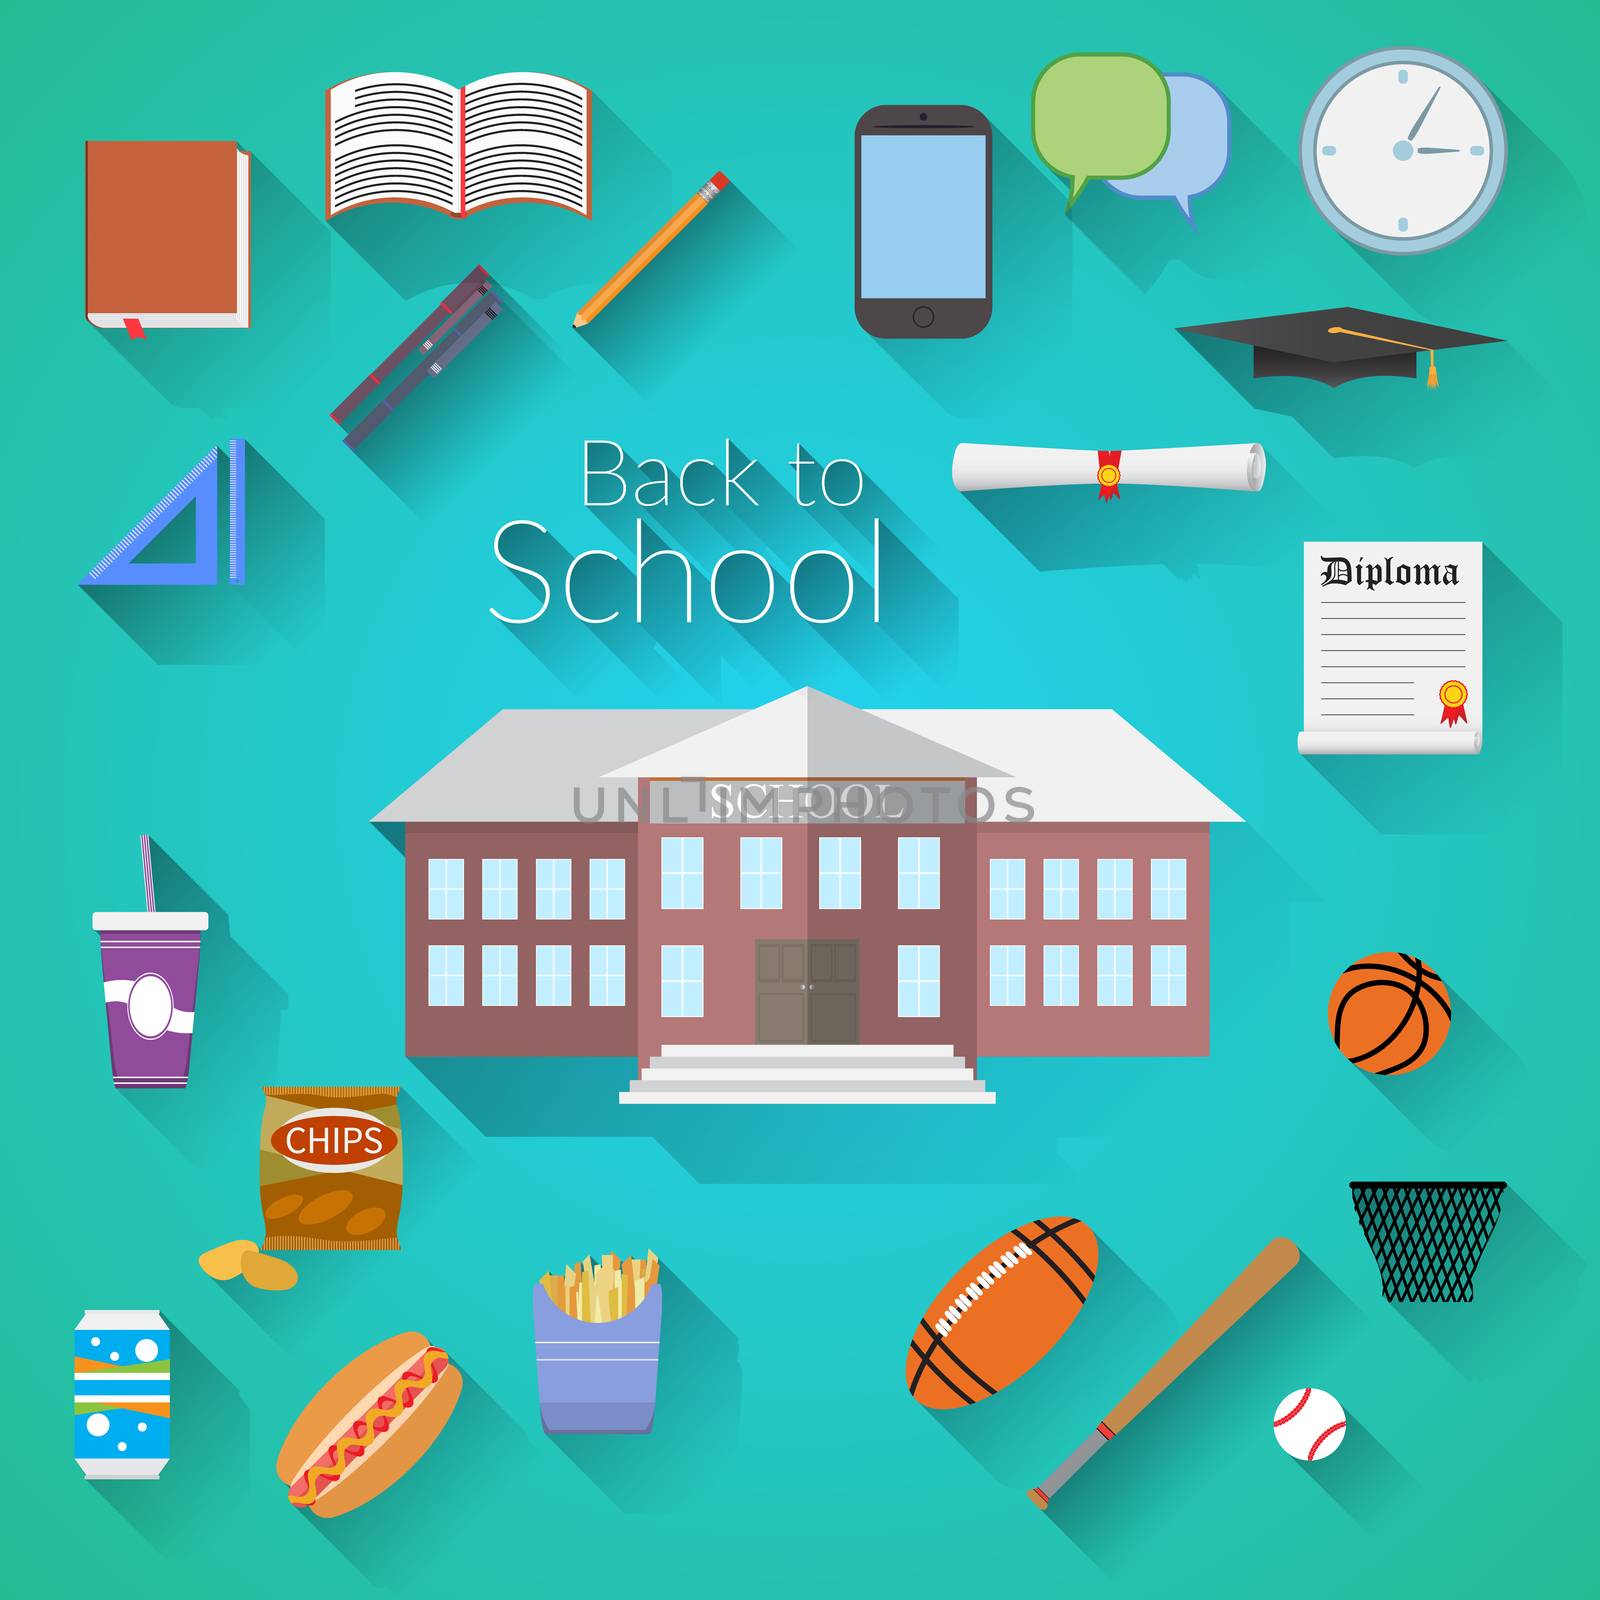 Back to School Flat design modern vector illustration, school building, pen, pensil, food, sport items, diploma and graduation cap icons with long shadow by Lemon_workshop